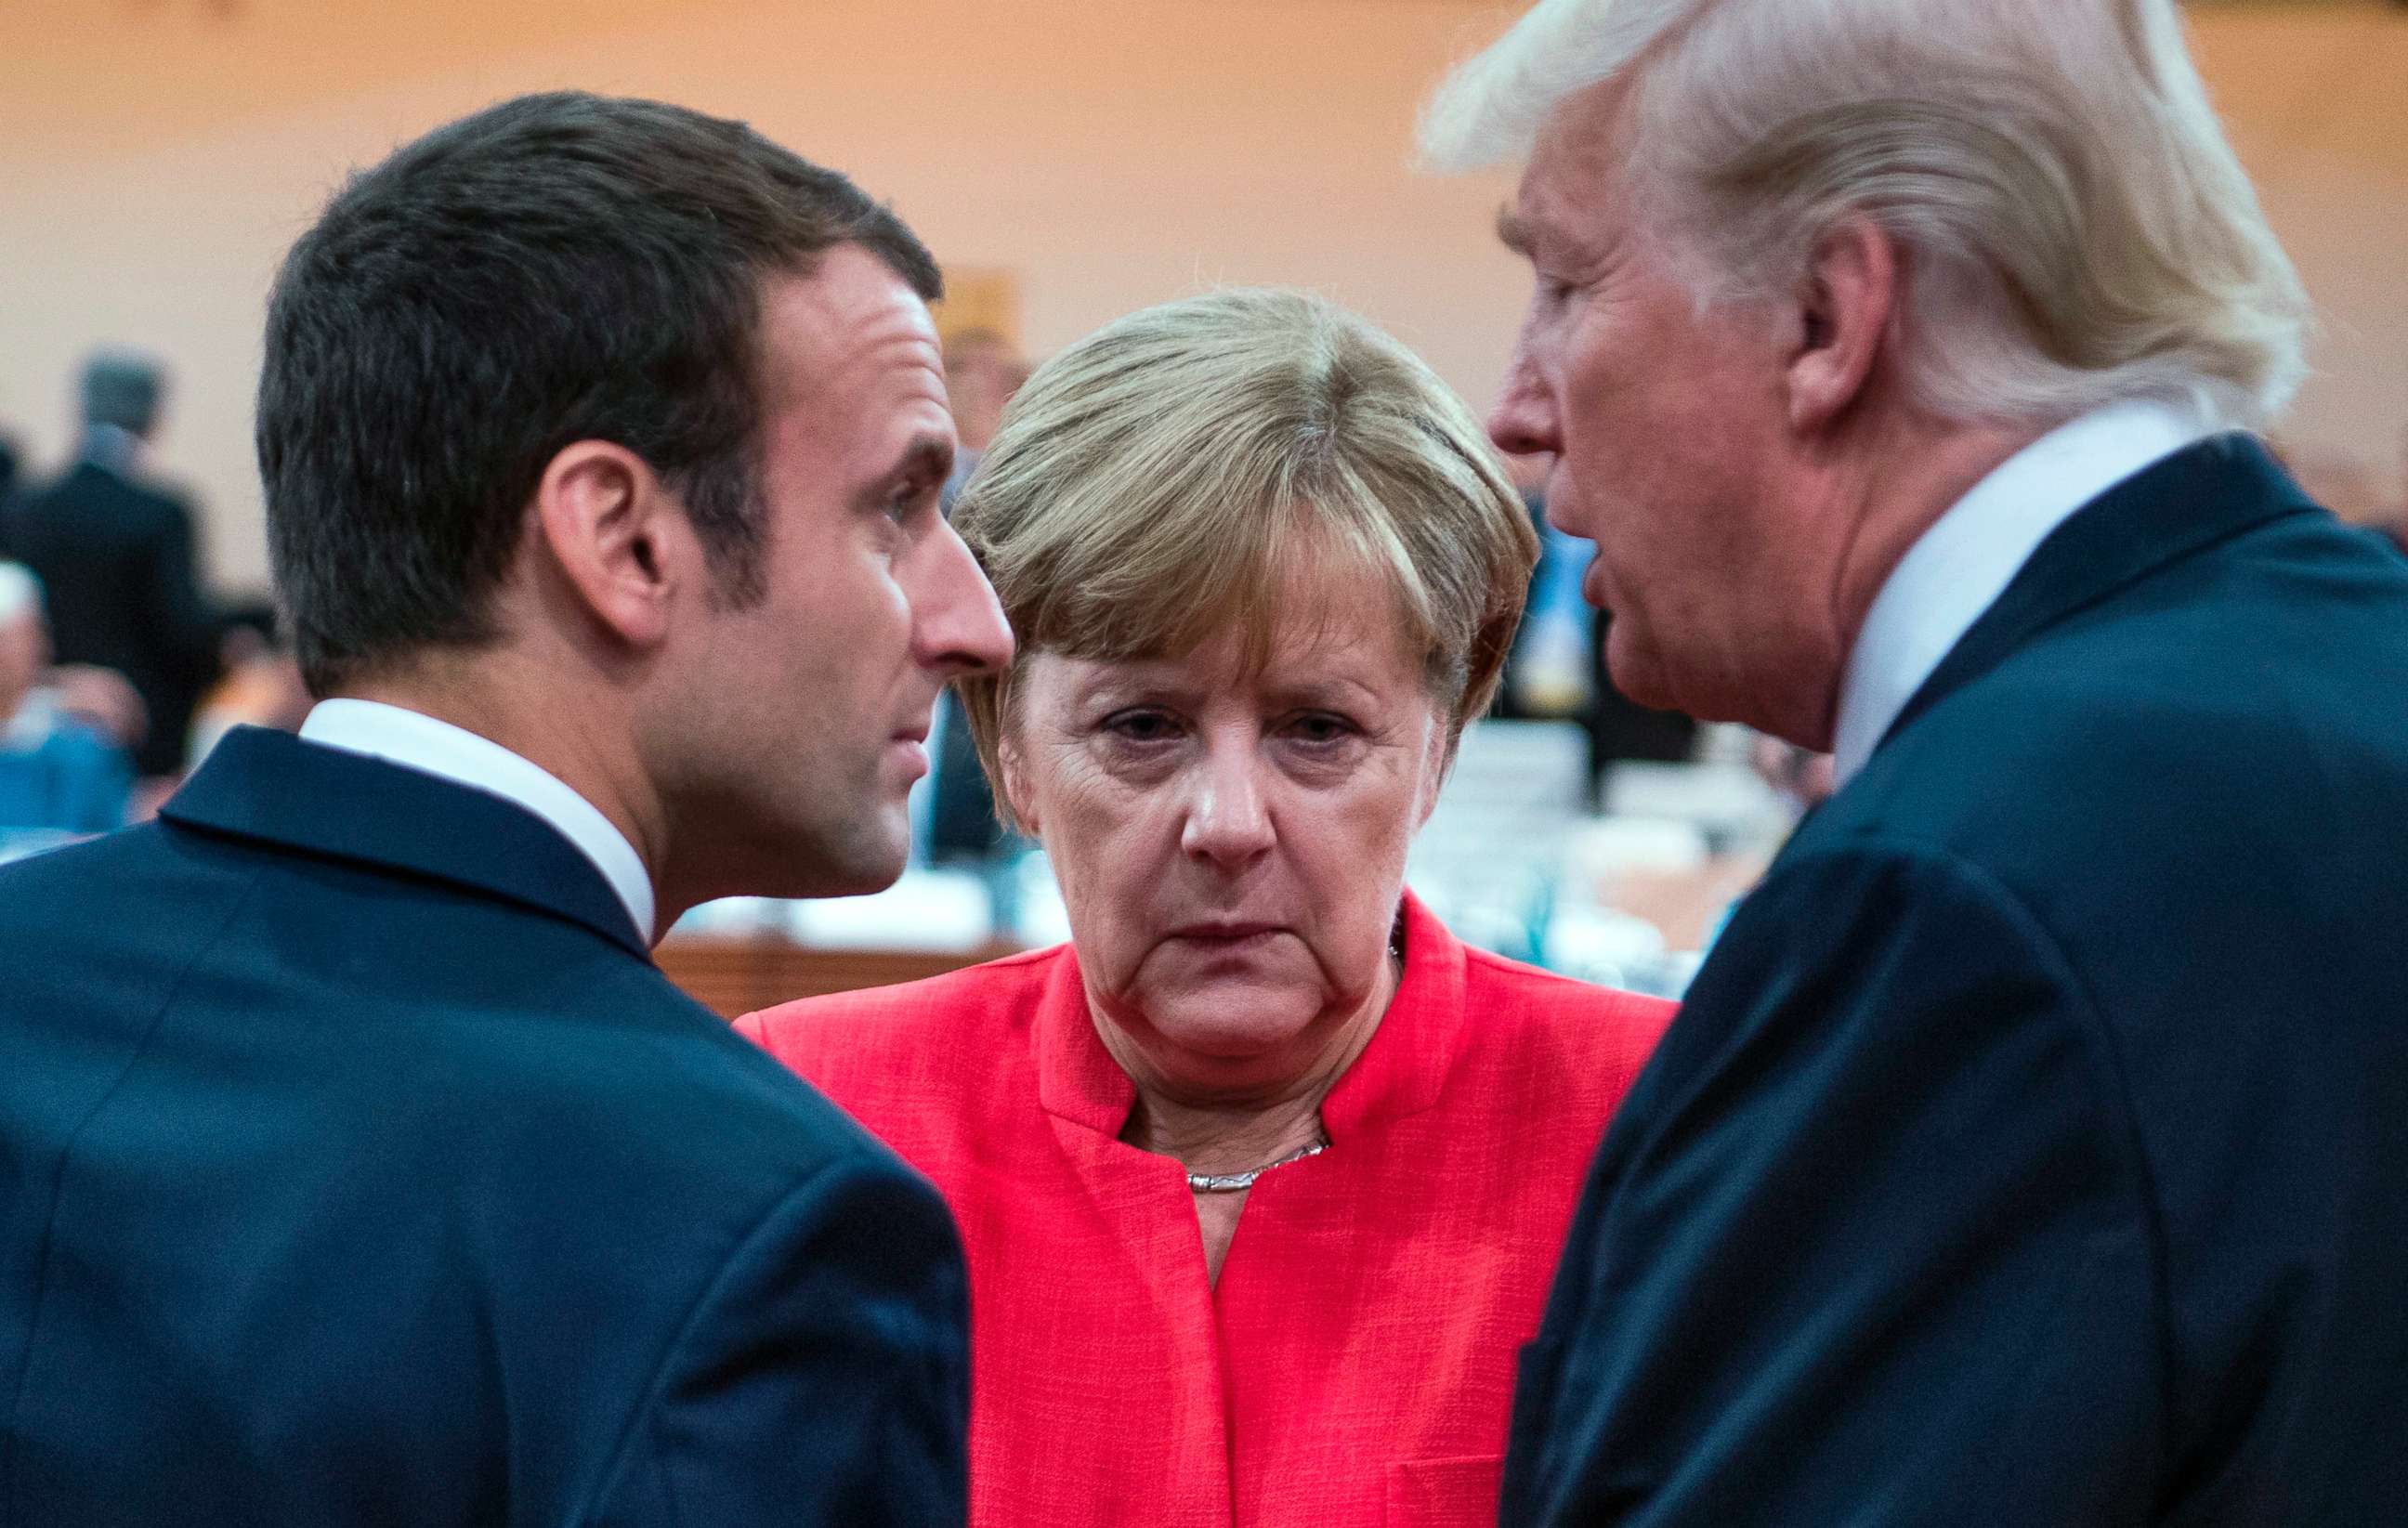 PHOTO: French President Emmanuel Macron, German Chancellor Angela Merkel and US President Donald Trump confer at the start of the first working session of the G20 meeting in Hamburg, Germany, July 7, 2017.